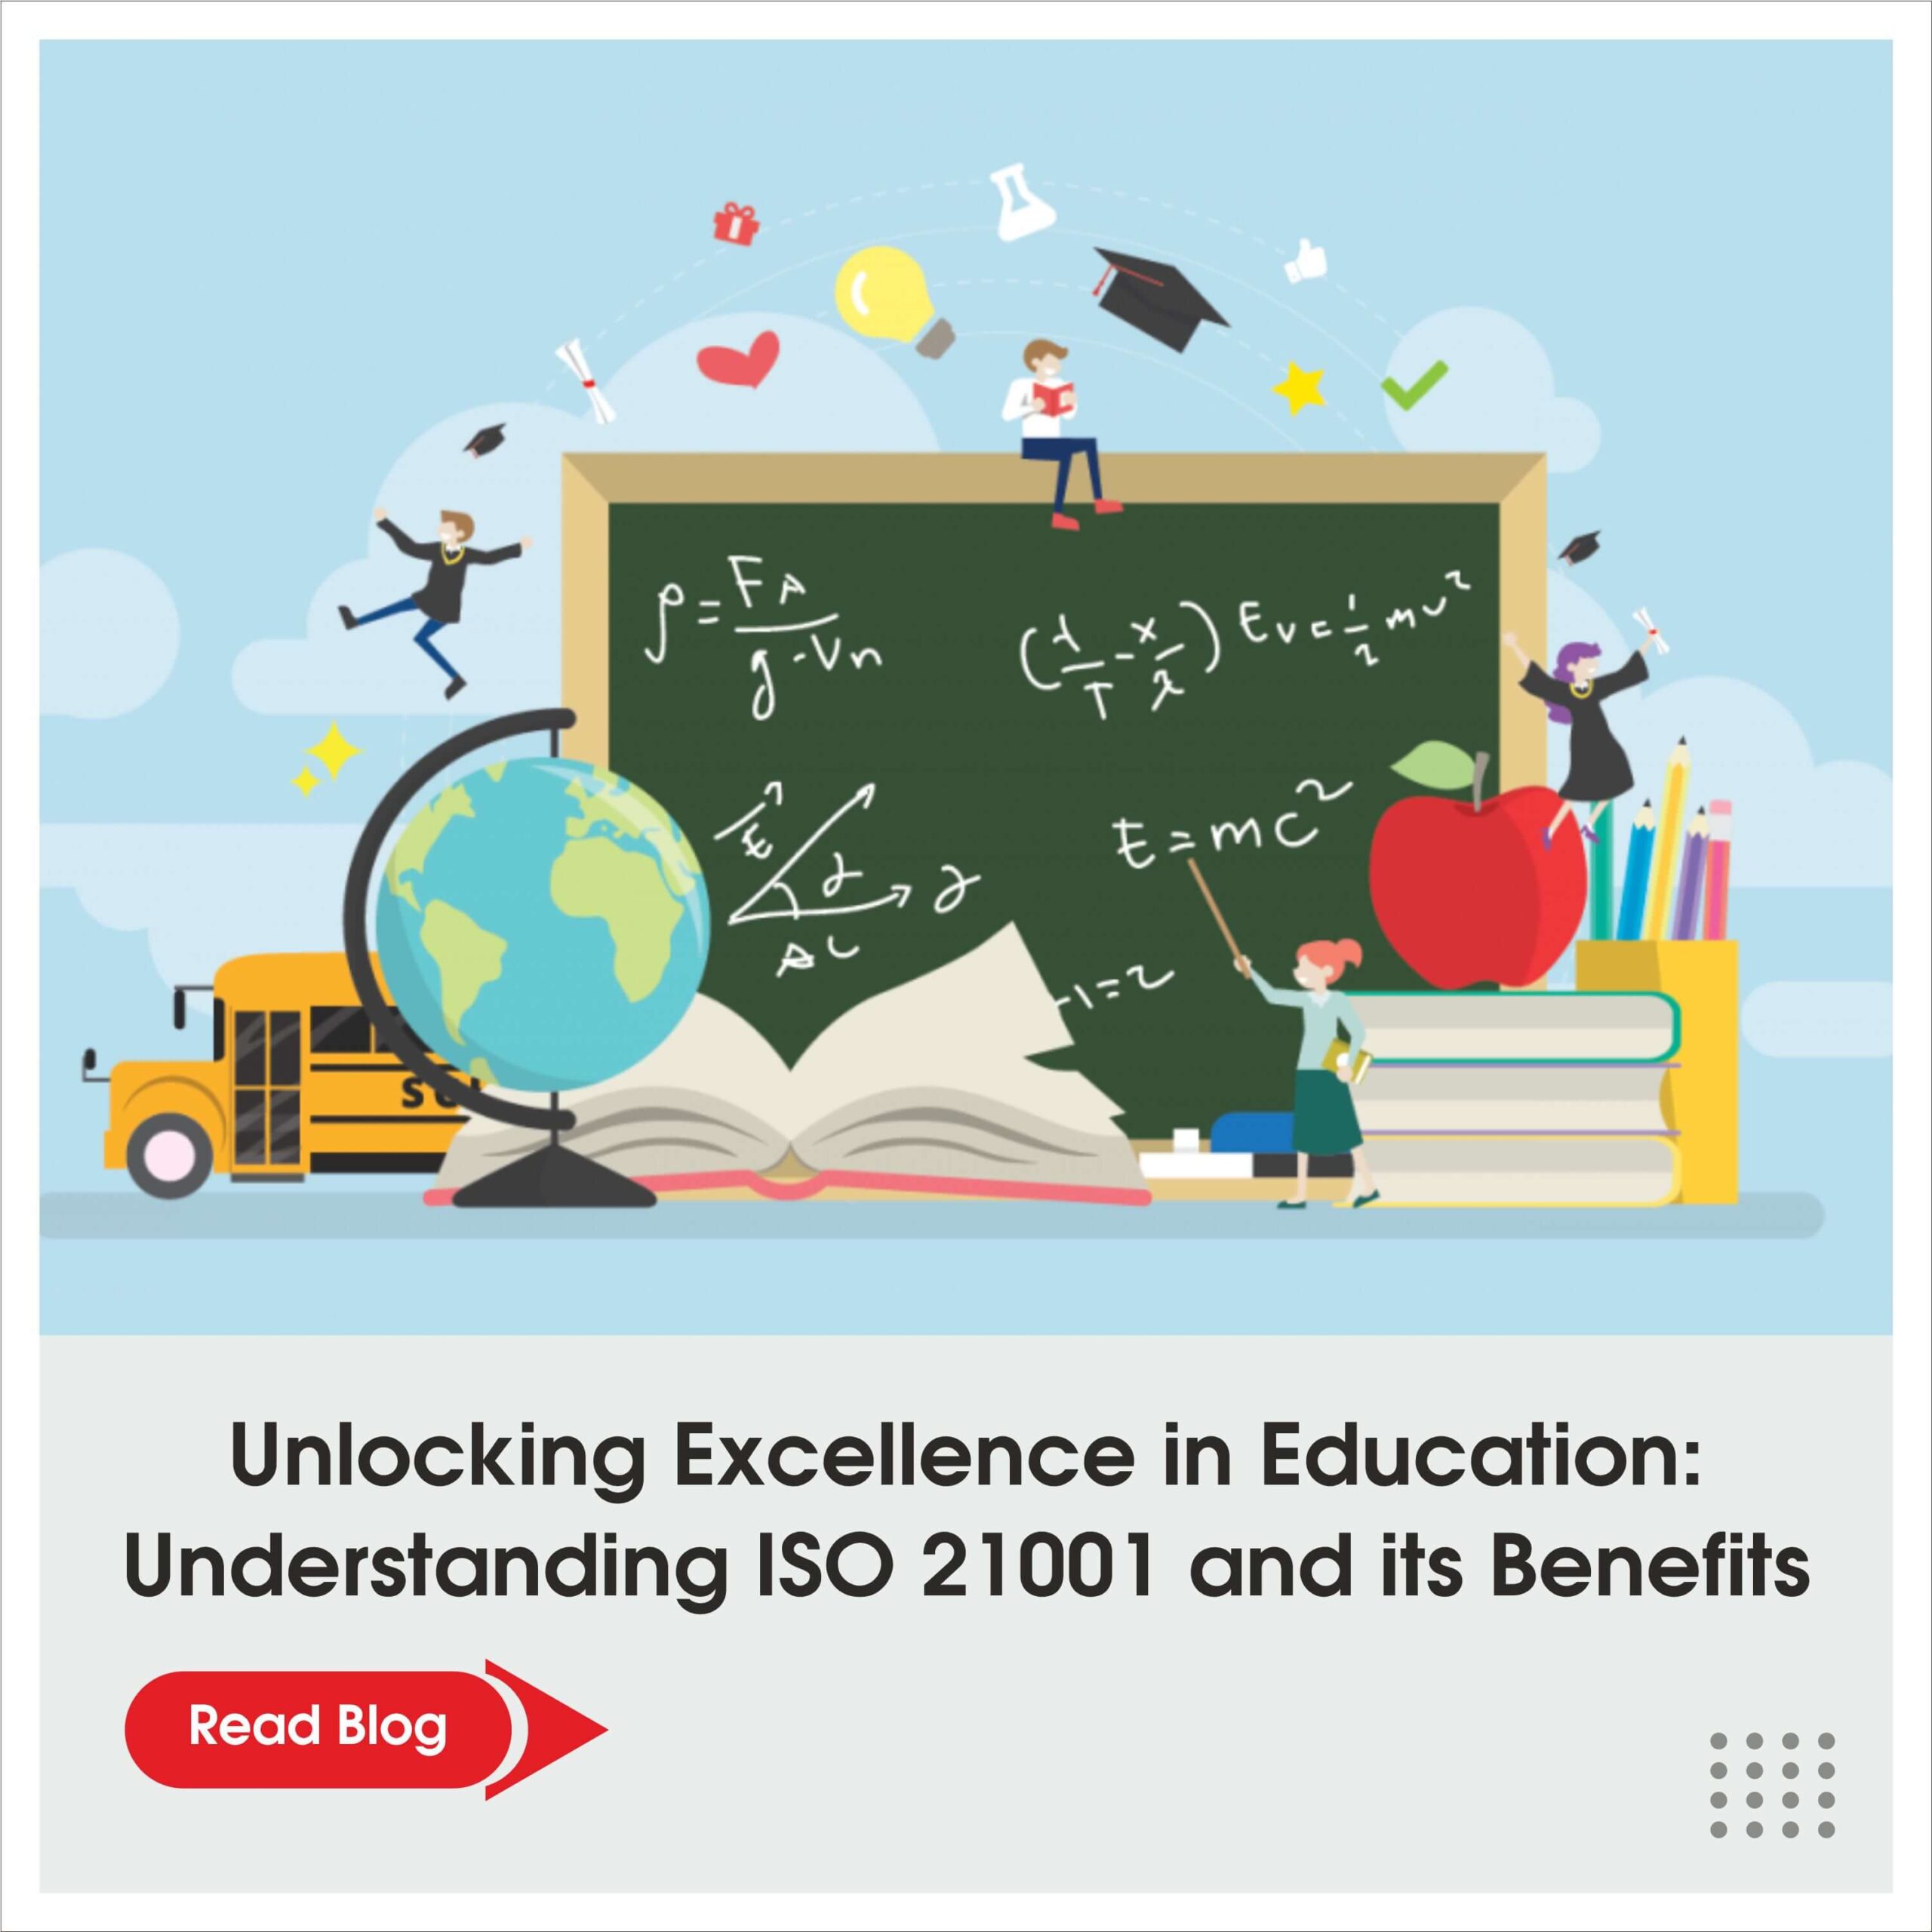 Unlocking Excellence in Education: Understanding ISO 21001:2018 and its Benefits